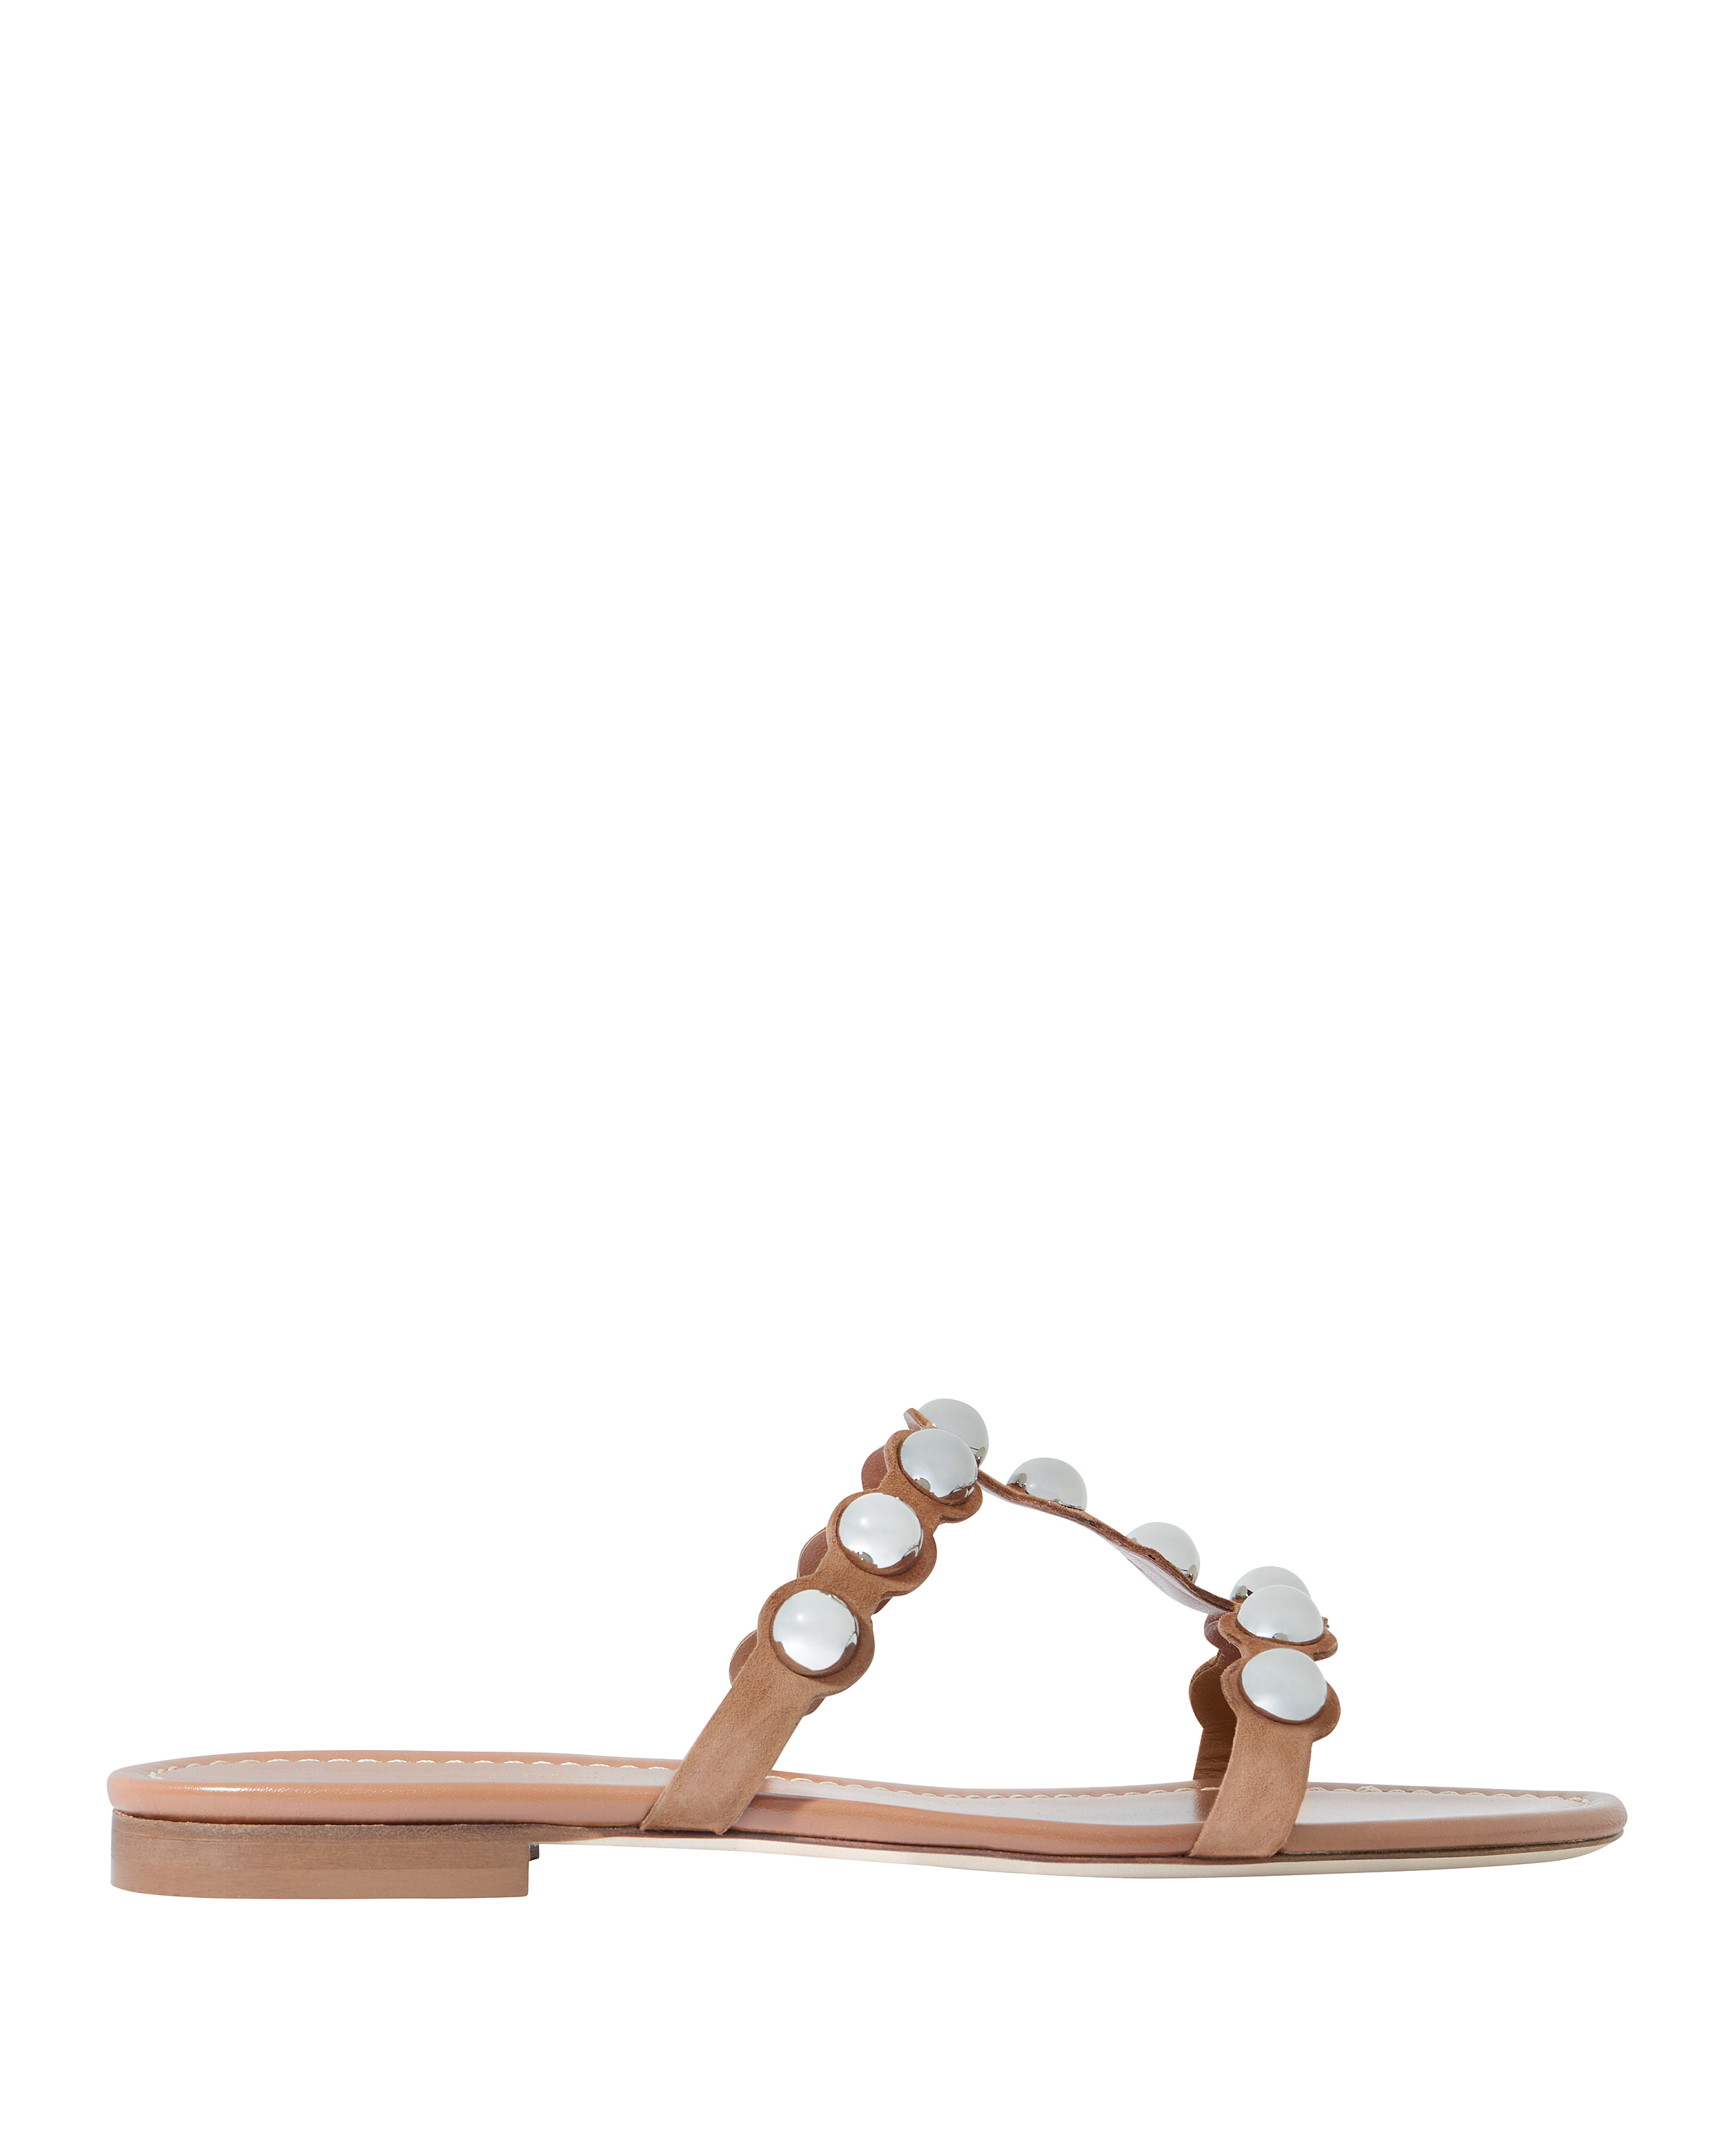 Lia Studded Suede Sandals